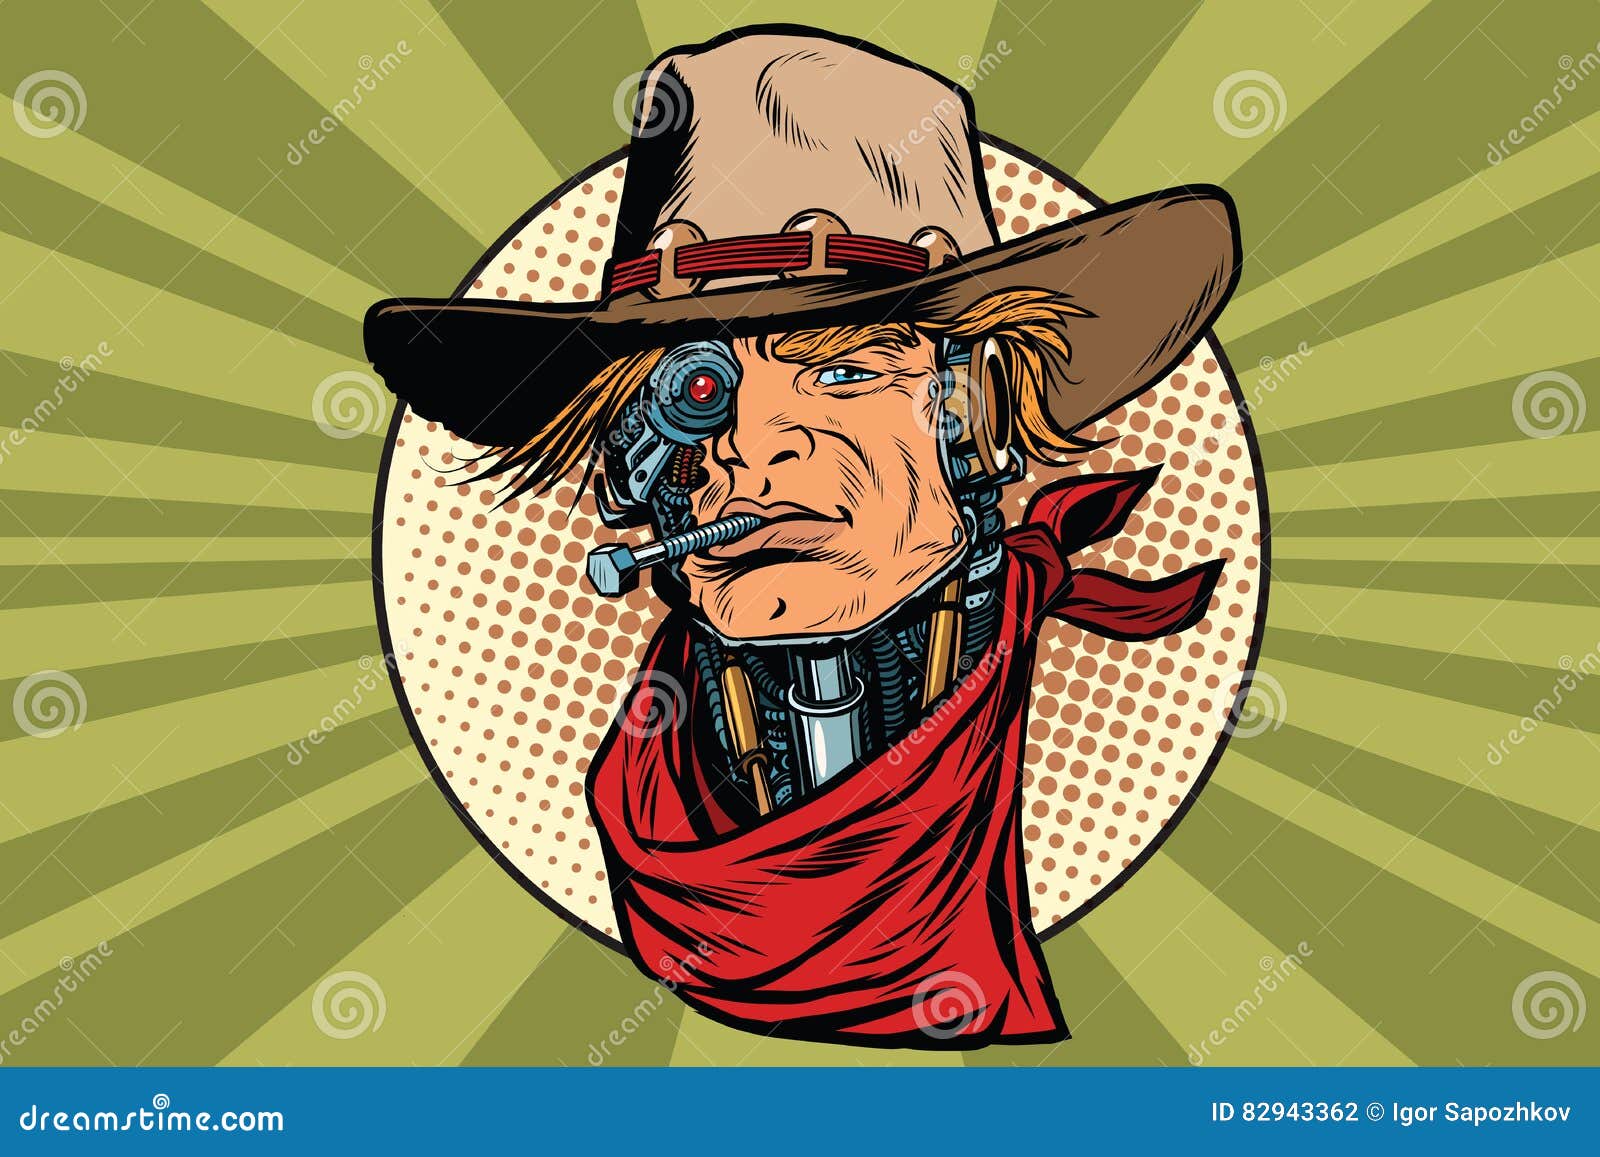 Wild West Bandit Robot Steampunk Stock Vector - Illustration of action ...